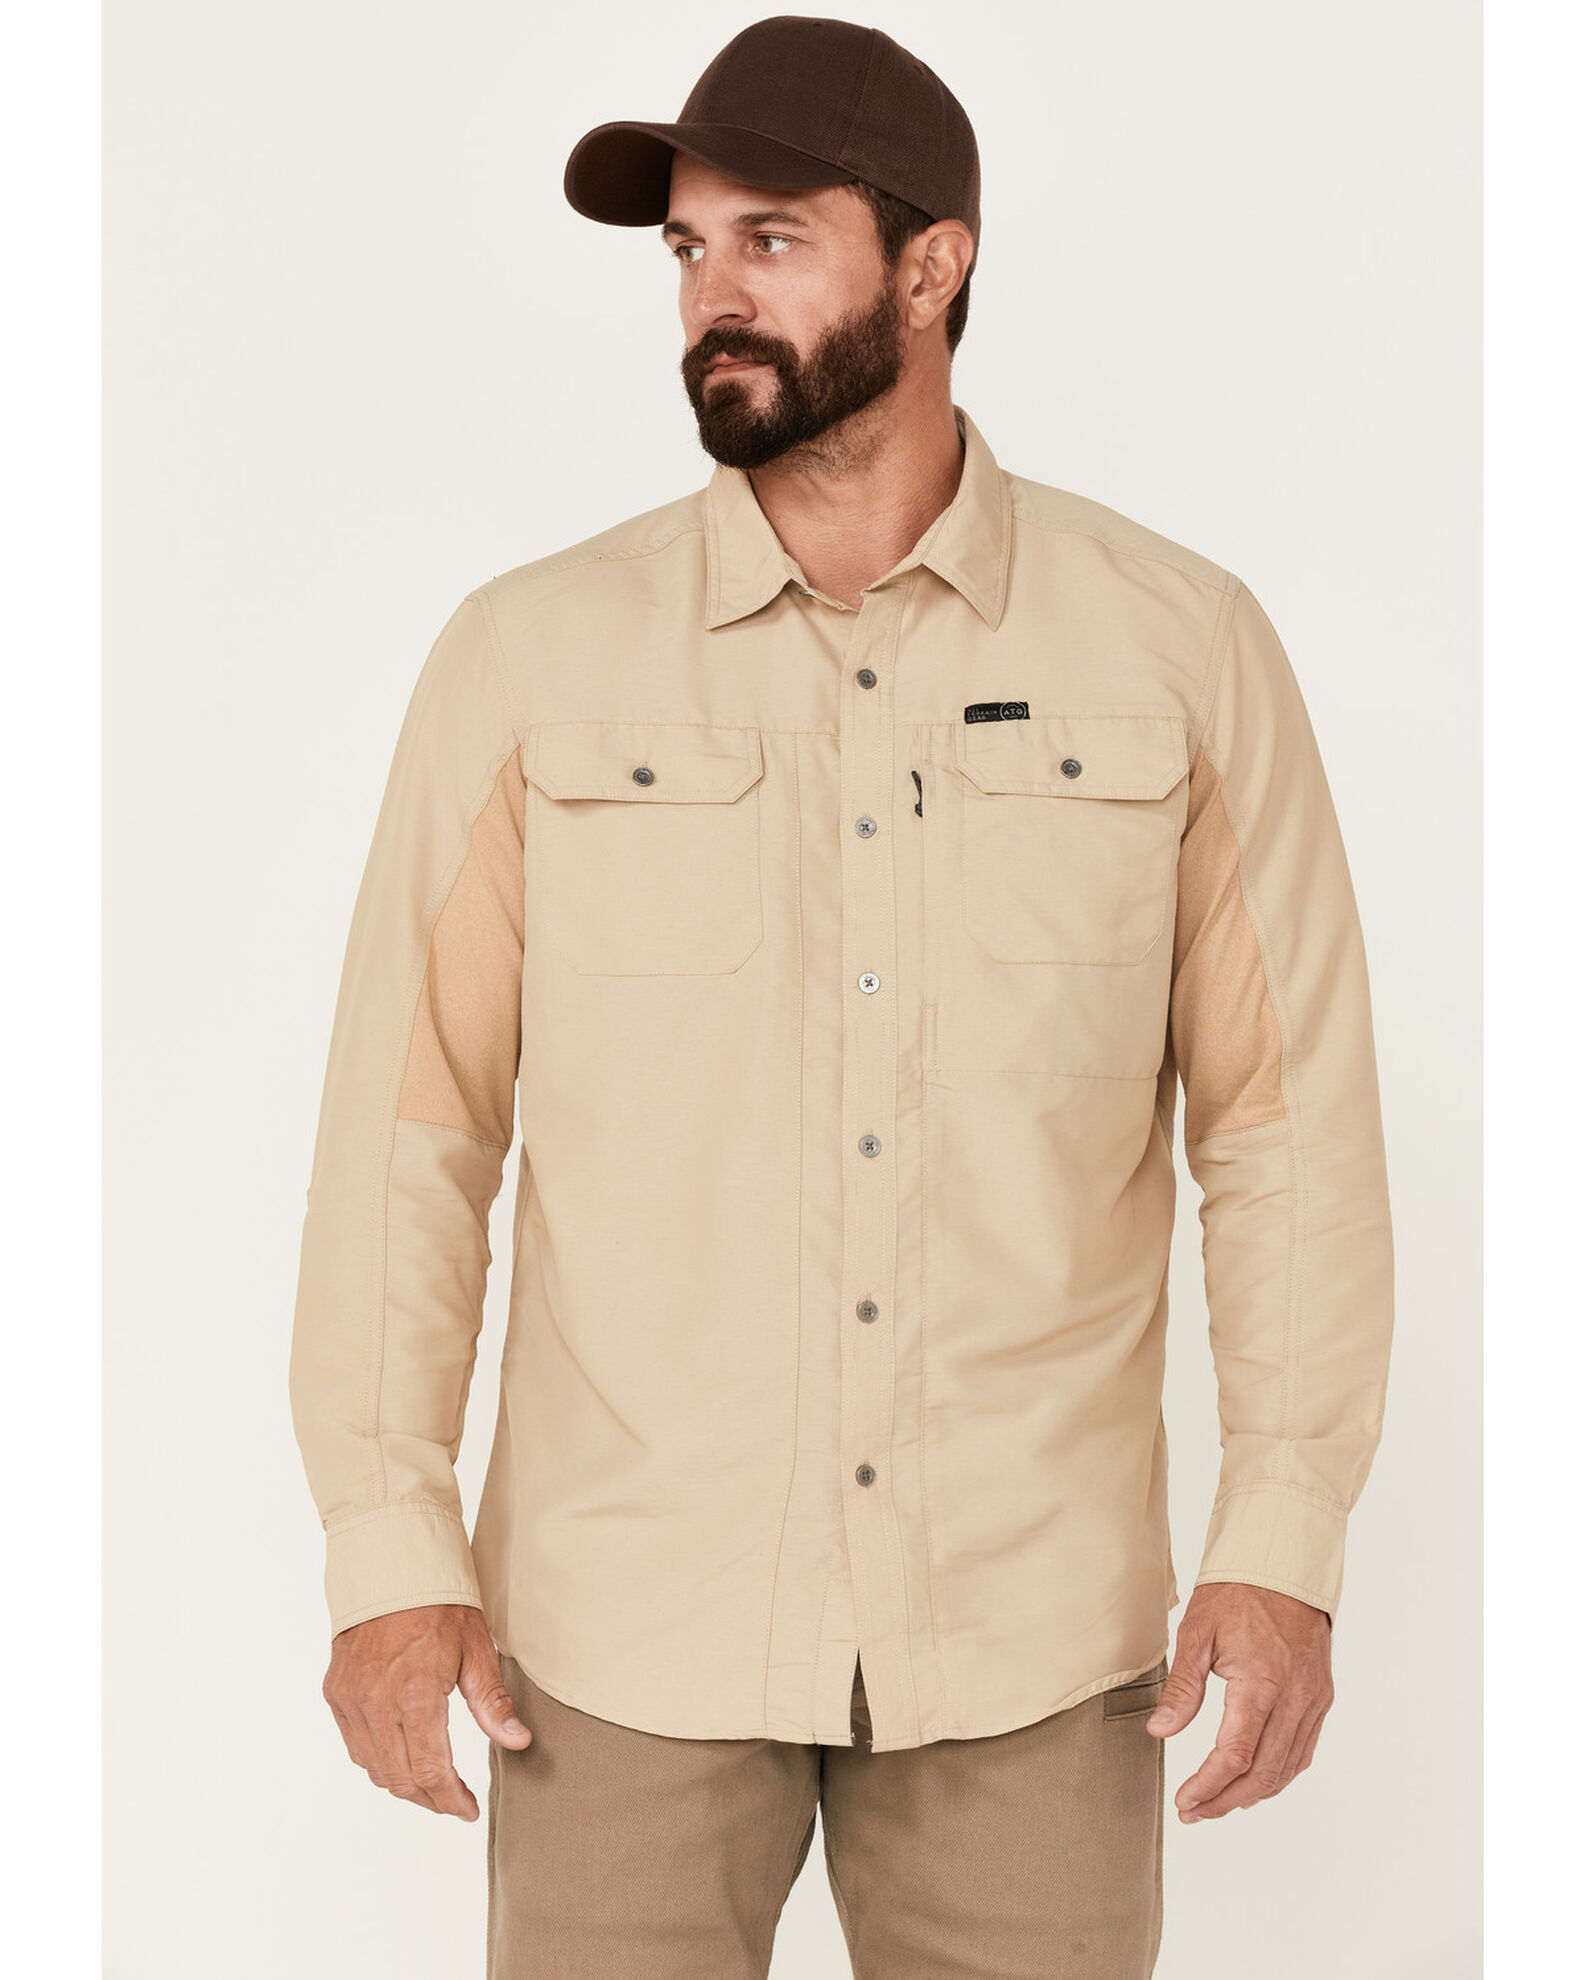 ATG™ by Wrangler Men's All Terrain Twill Mix Material Utility Long Sleeve  Western Shirt - Country Outfitter